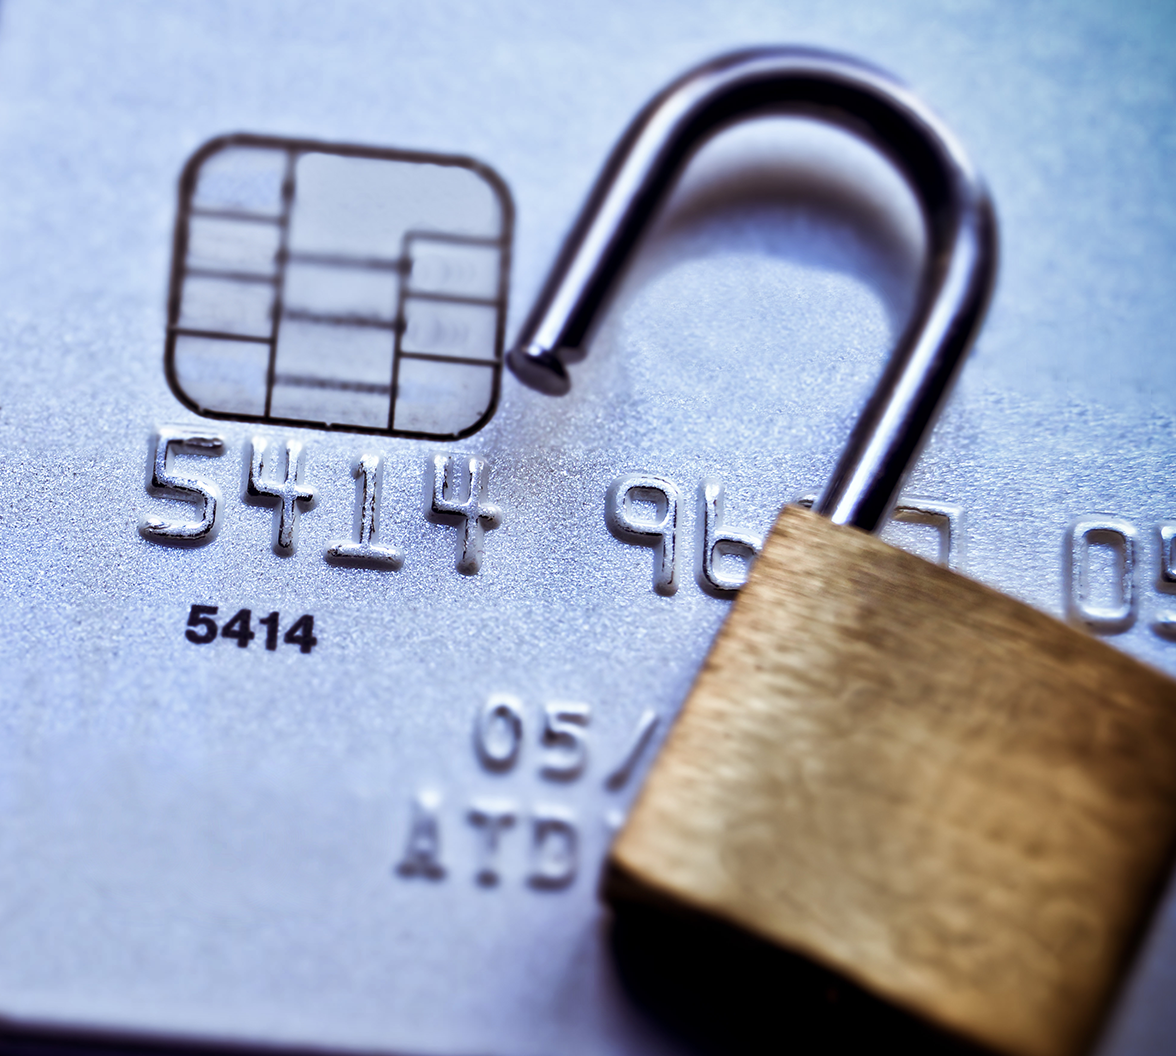 What the American Express Data Breach Should Teach the CSuite